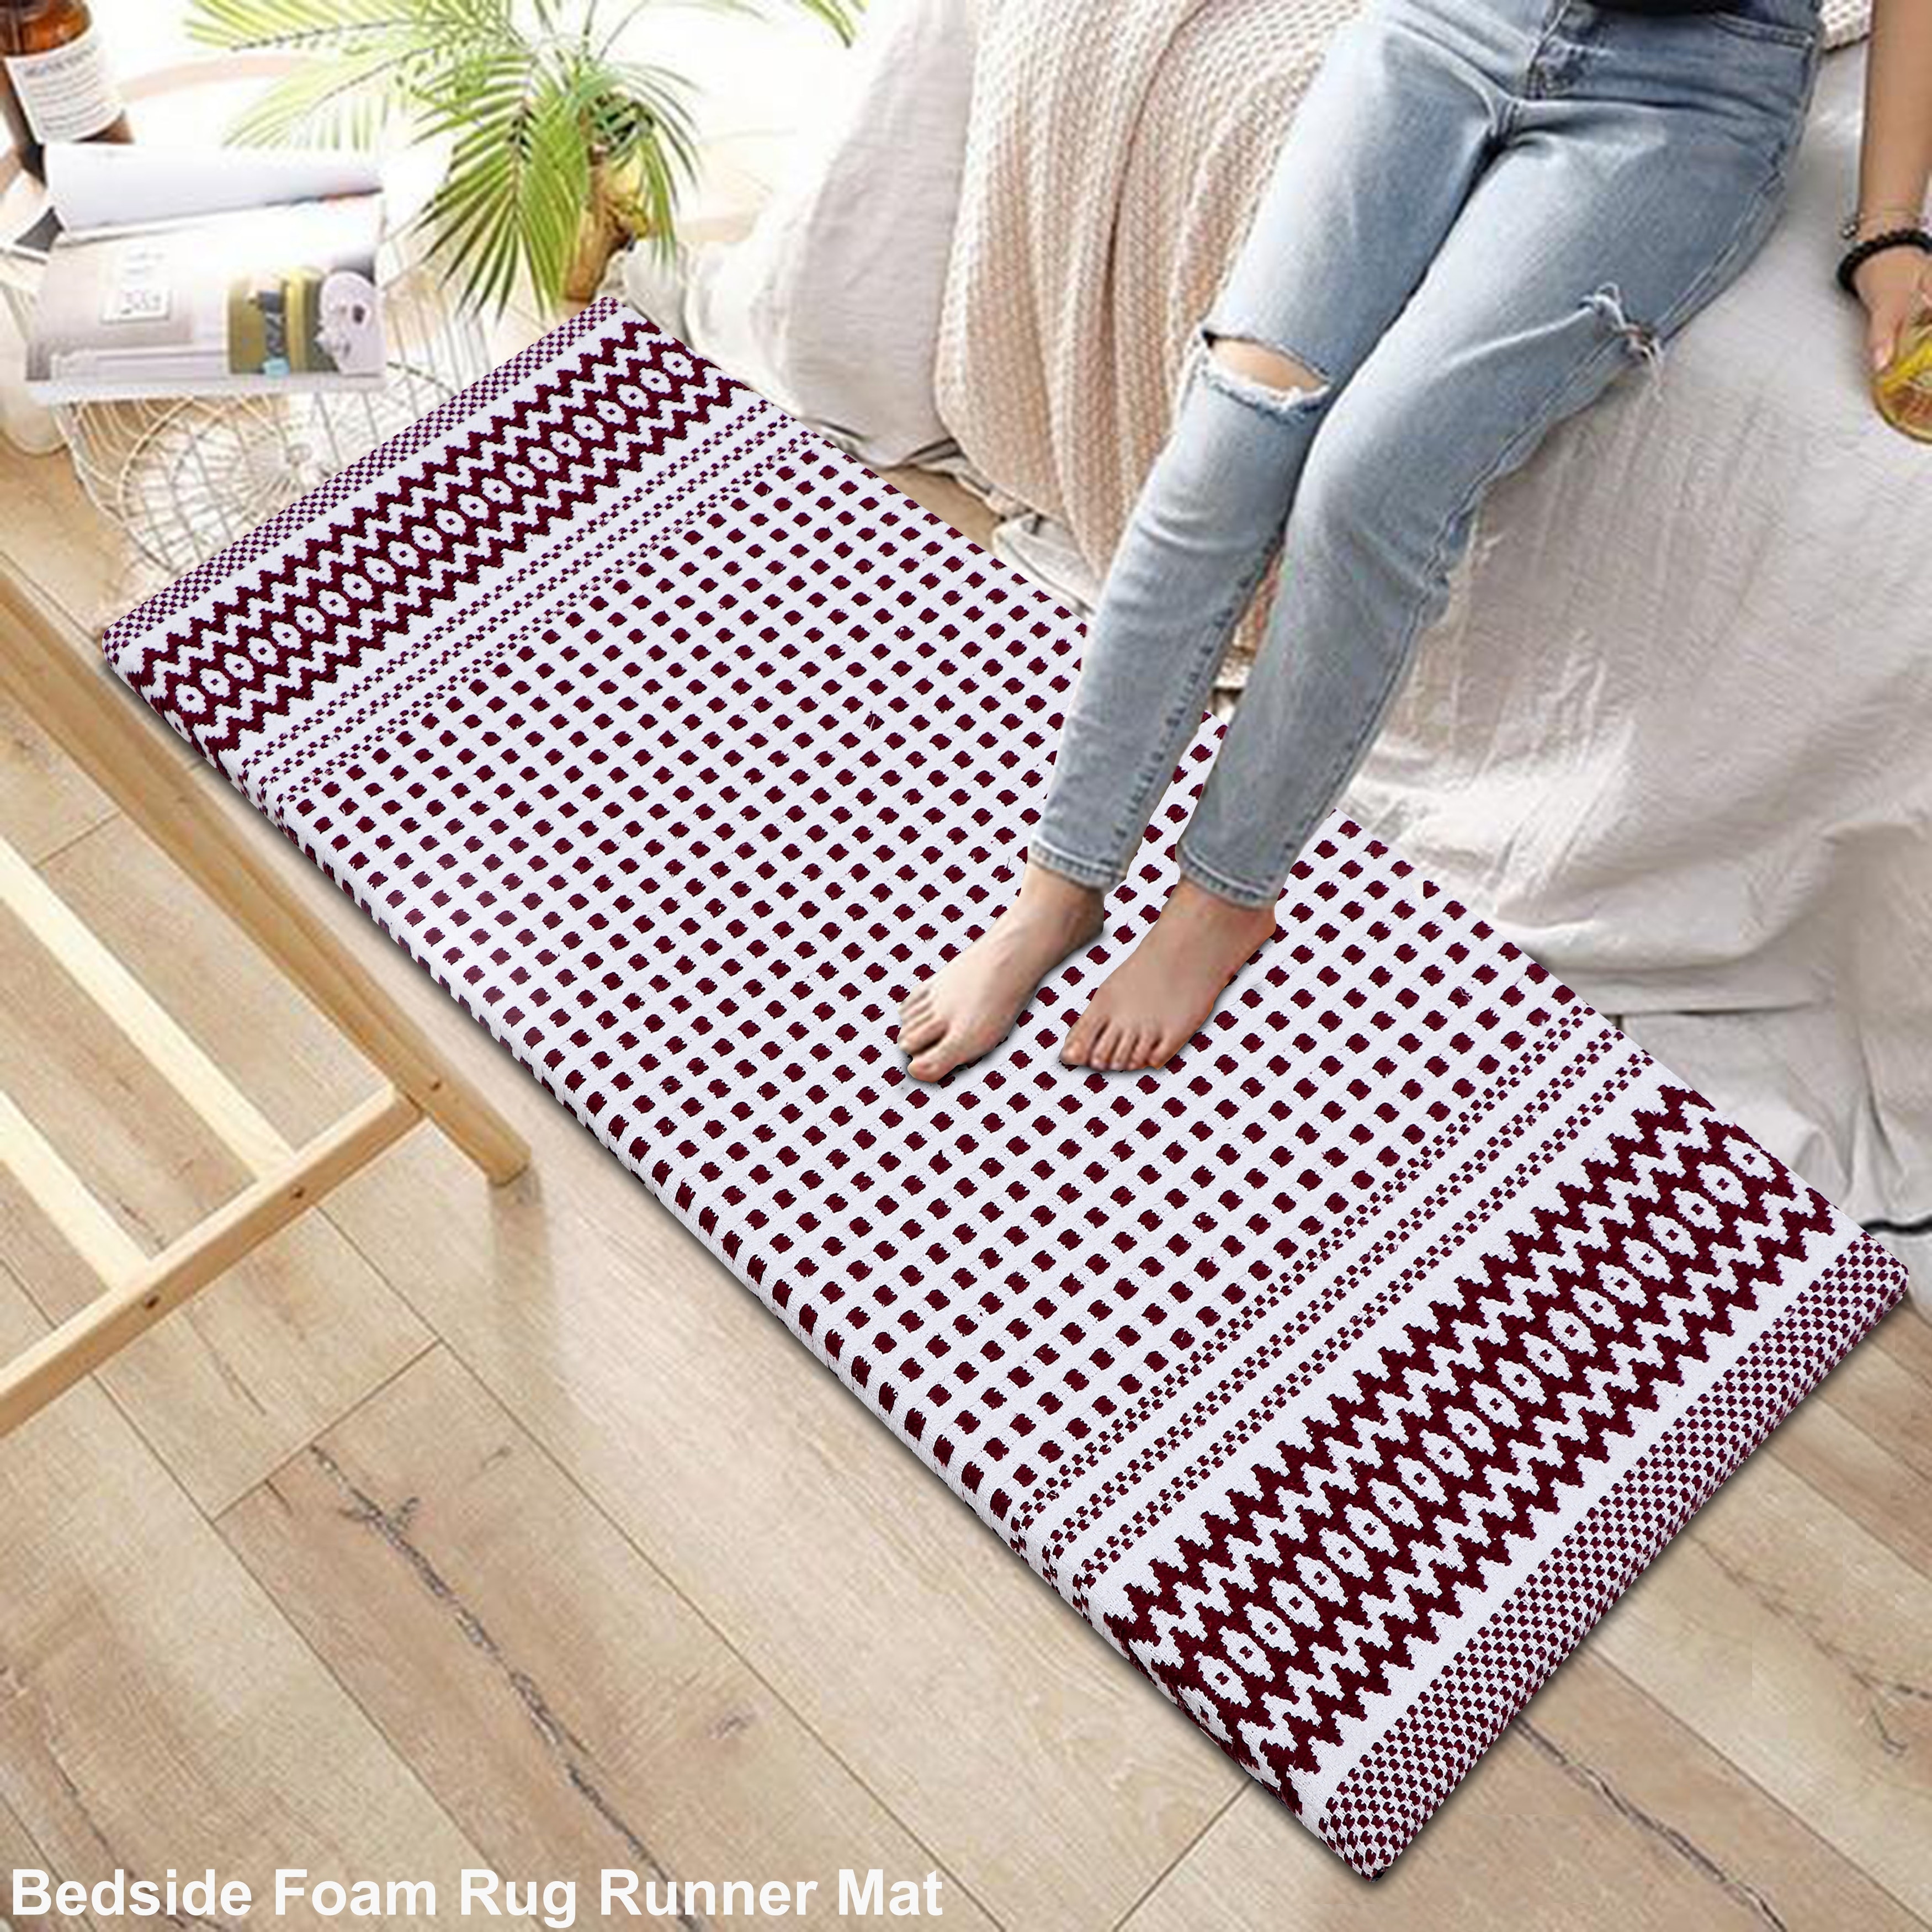 https://ak1.ostkcdn.com/images/products/is/images/direct/261bcd4791b4944b3f2187e82332b2fc9cd81ad5/Kitchen-Runner-Rug--Mat-Cushioned-Cotton-Hand-Woven-Anti-Fatigue-Mat-Kitchen-Bathroom-Bed-side-18x48%27%27.jpg